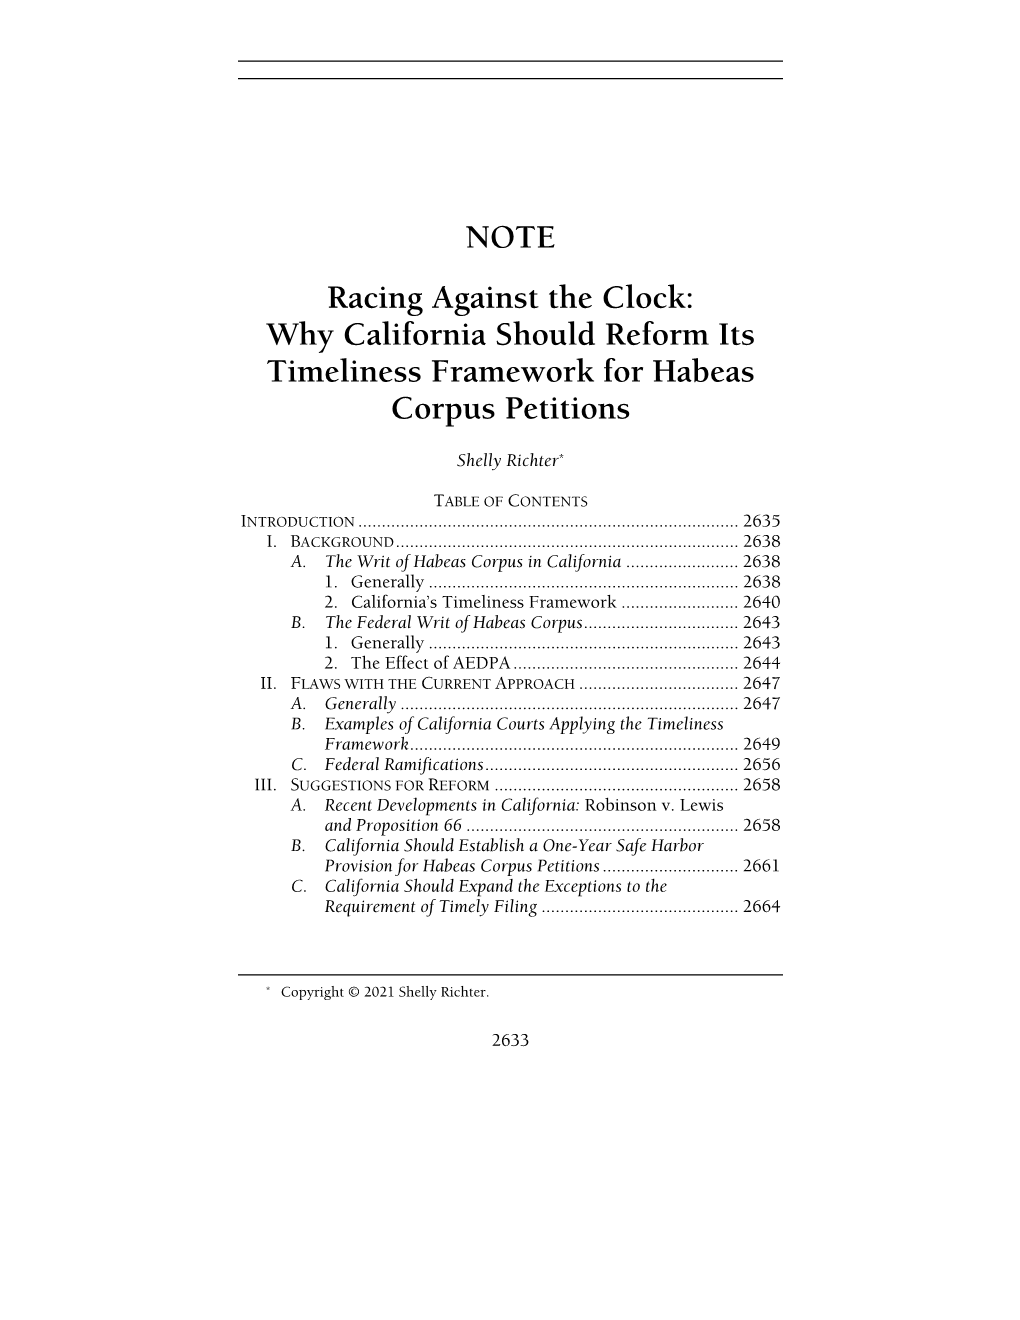 NOTE Racing Against the Clock: Why California Should Reform Its Timeliness Framework for Habeas Corpus Petitions